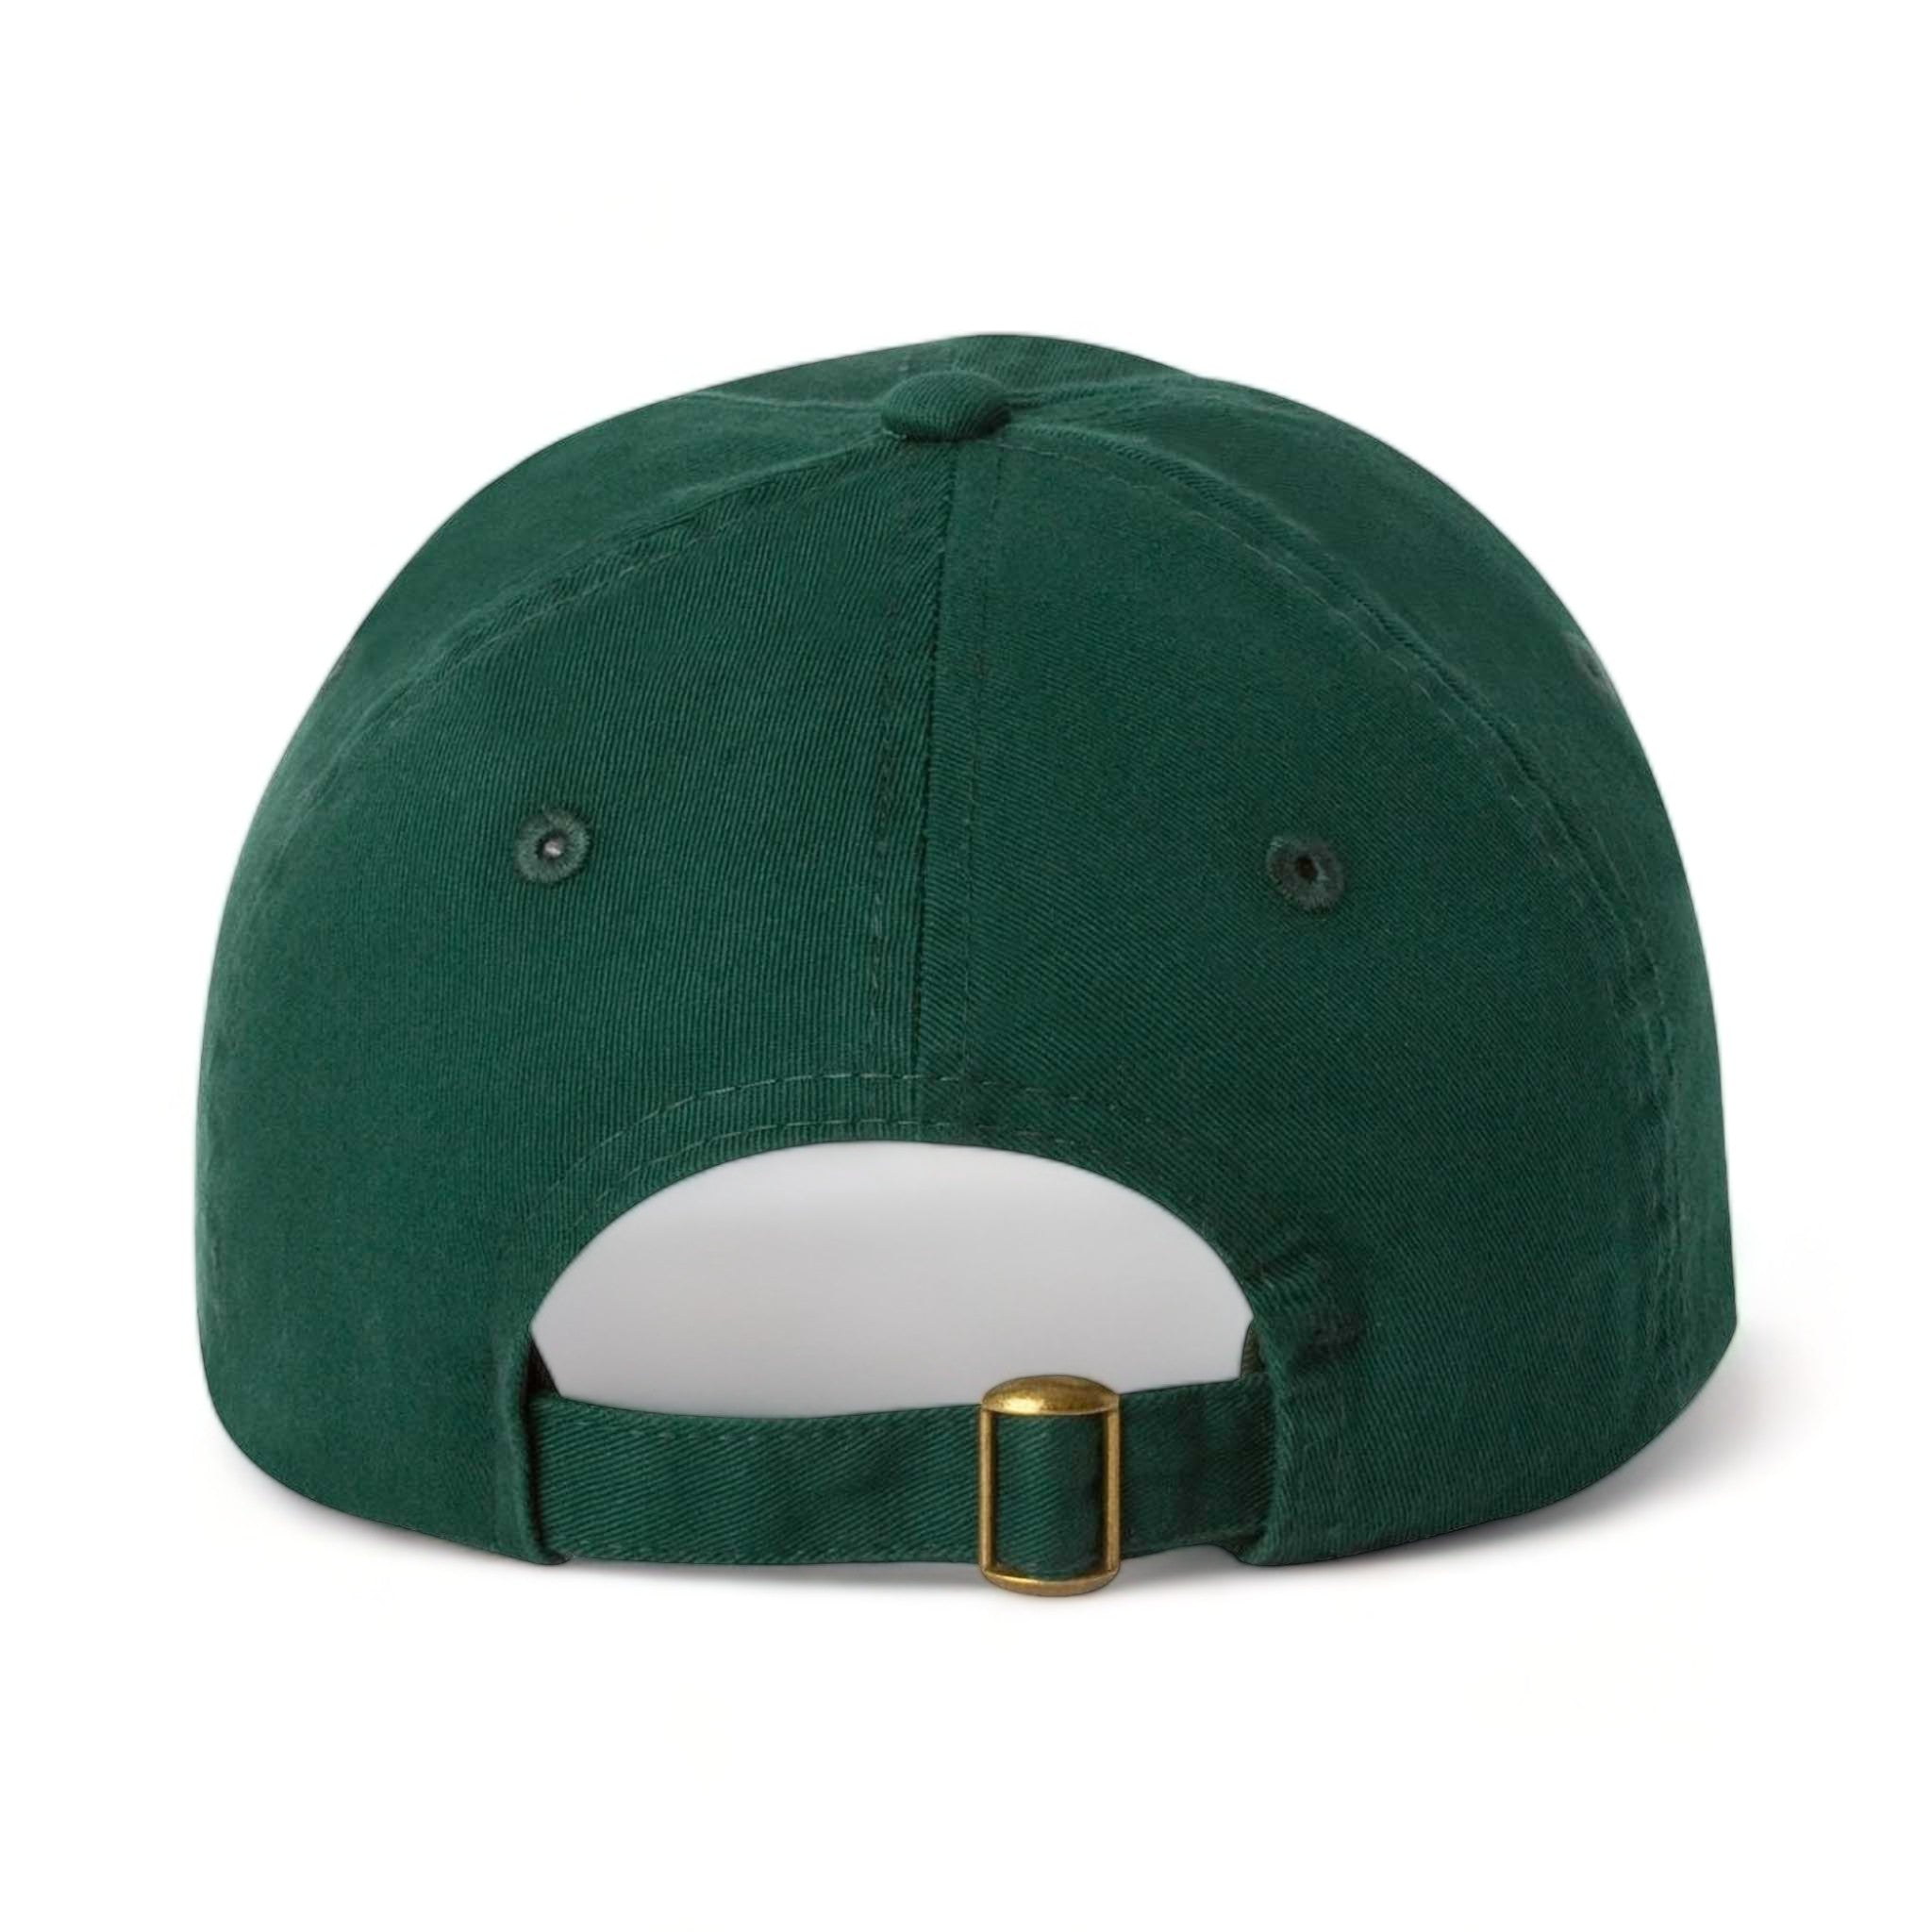 Back view of Valucap VC300A custom hat in forest green